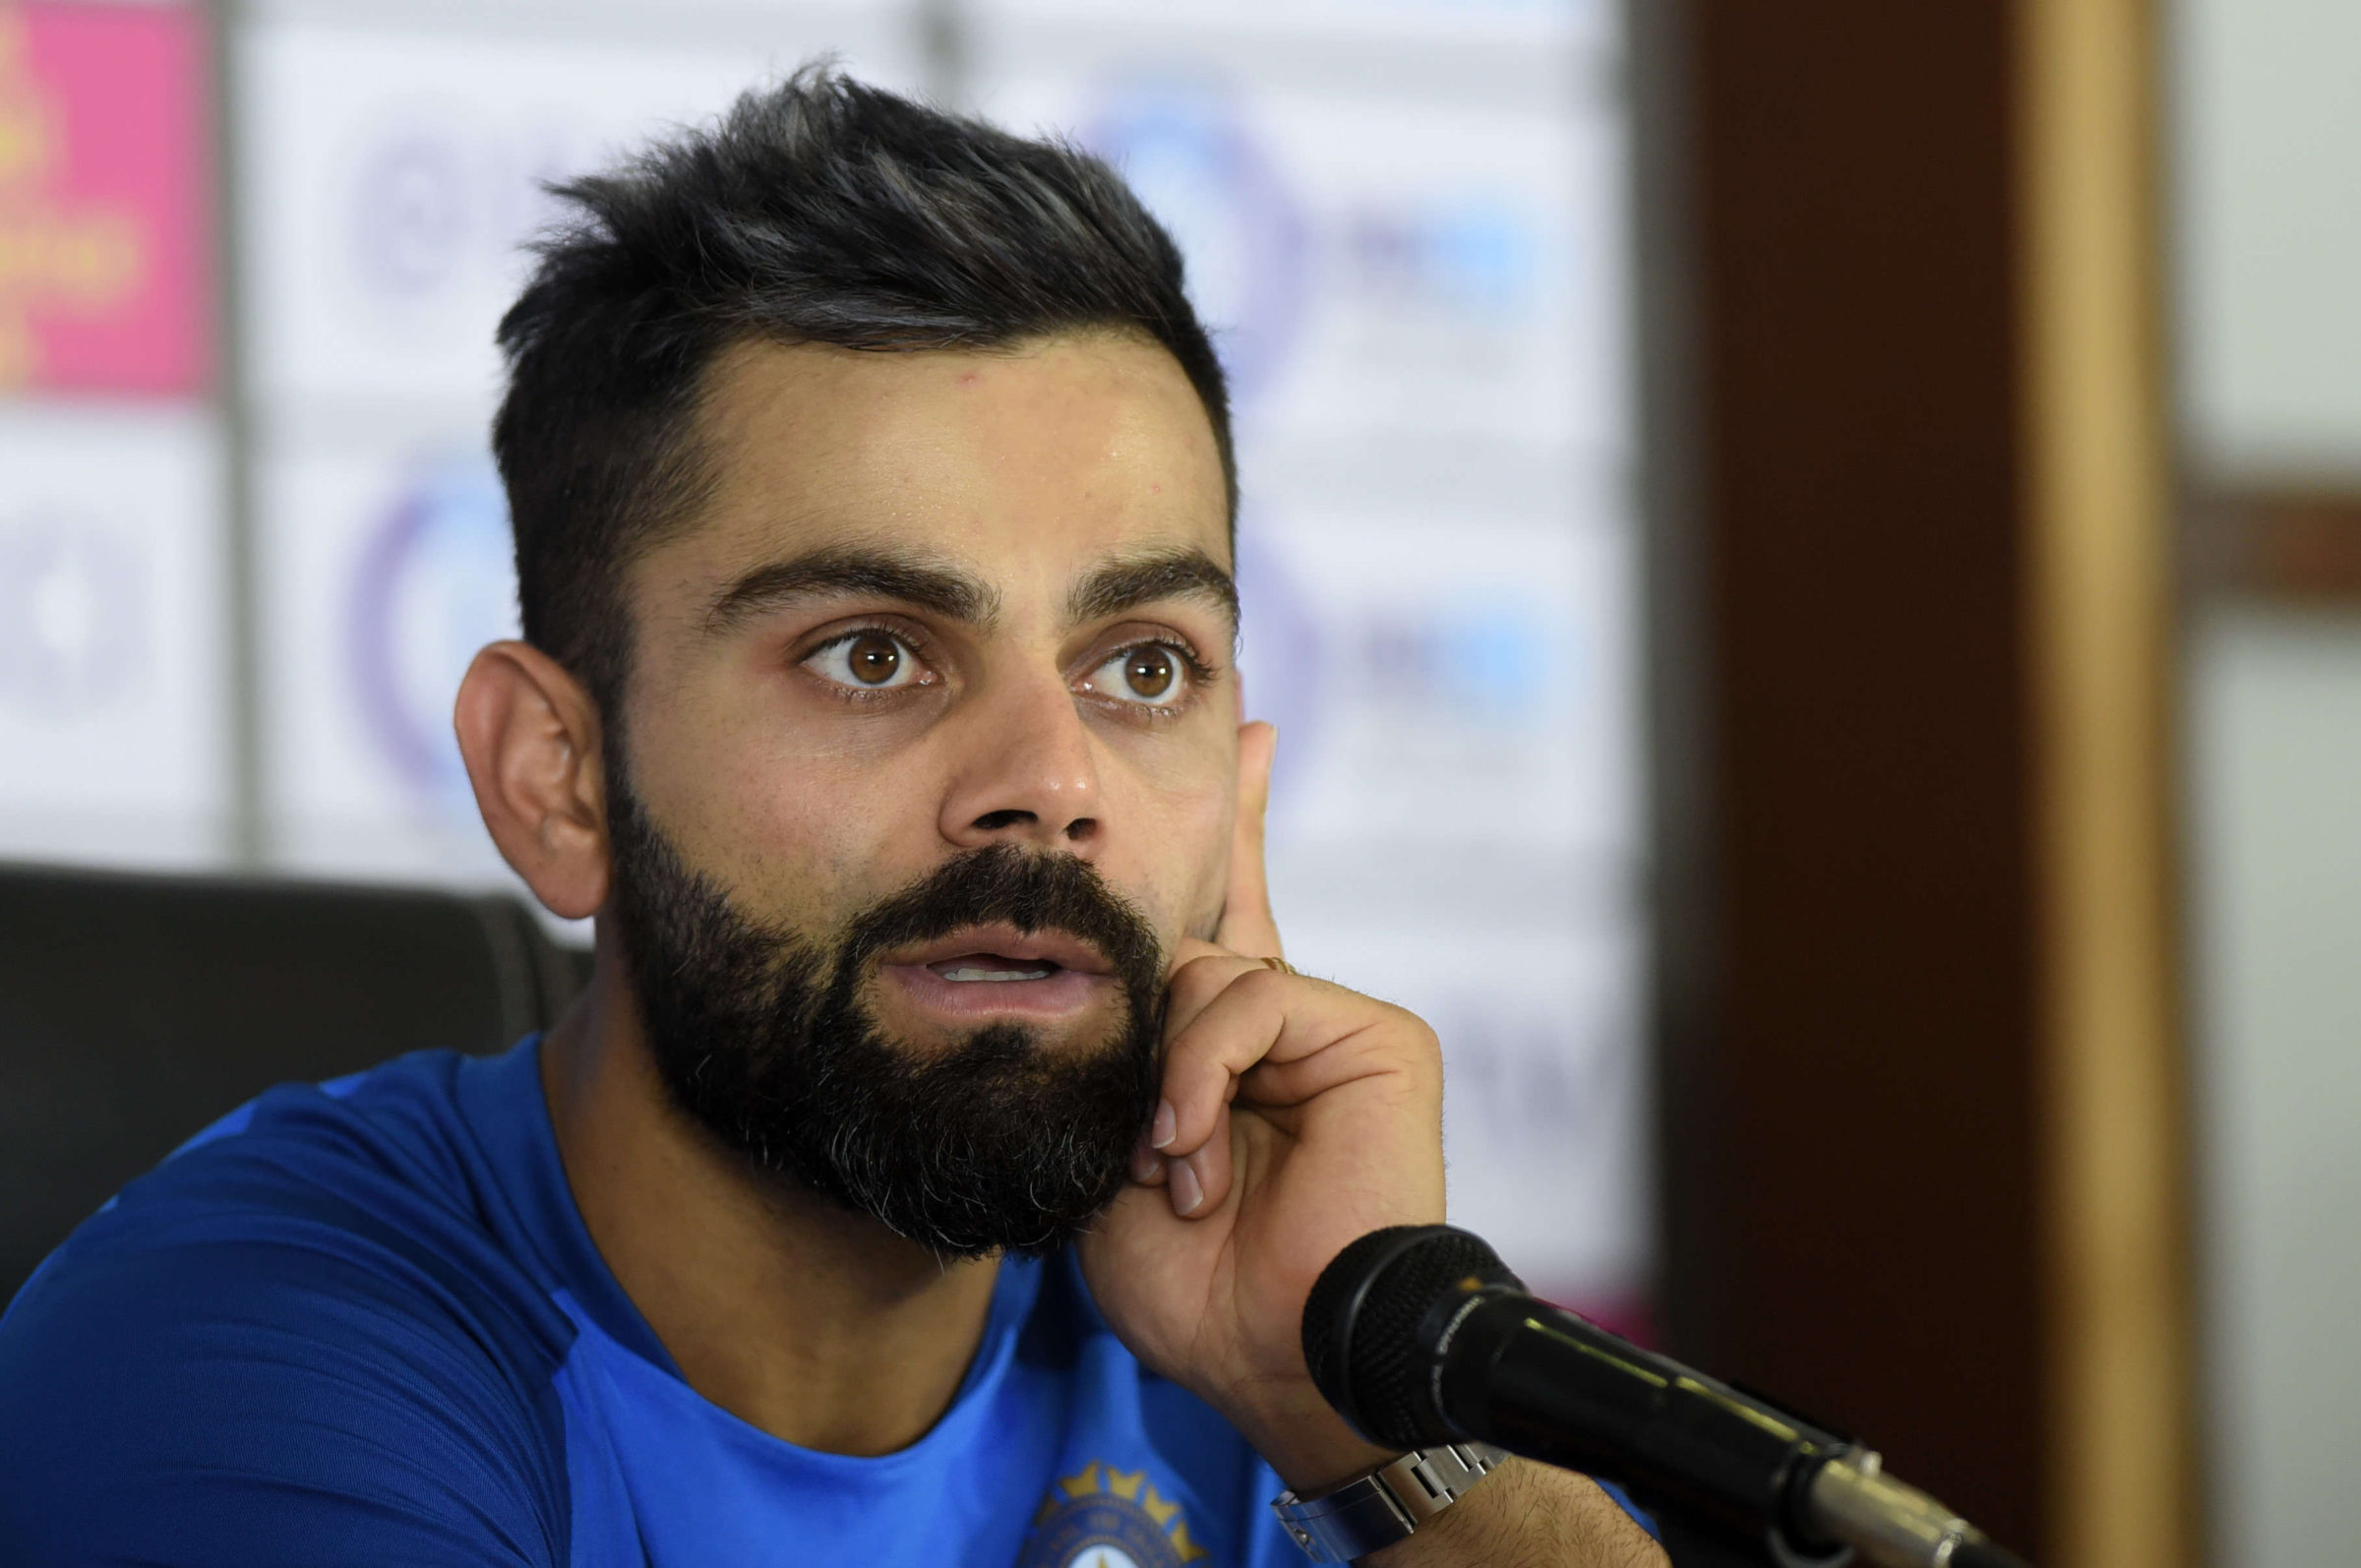 Virat Kohli becomes the only cricketer in top 10 earners list during lockdown via Instagram